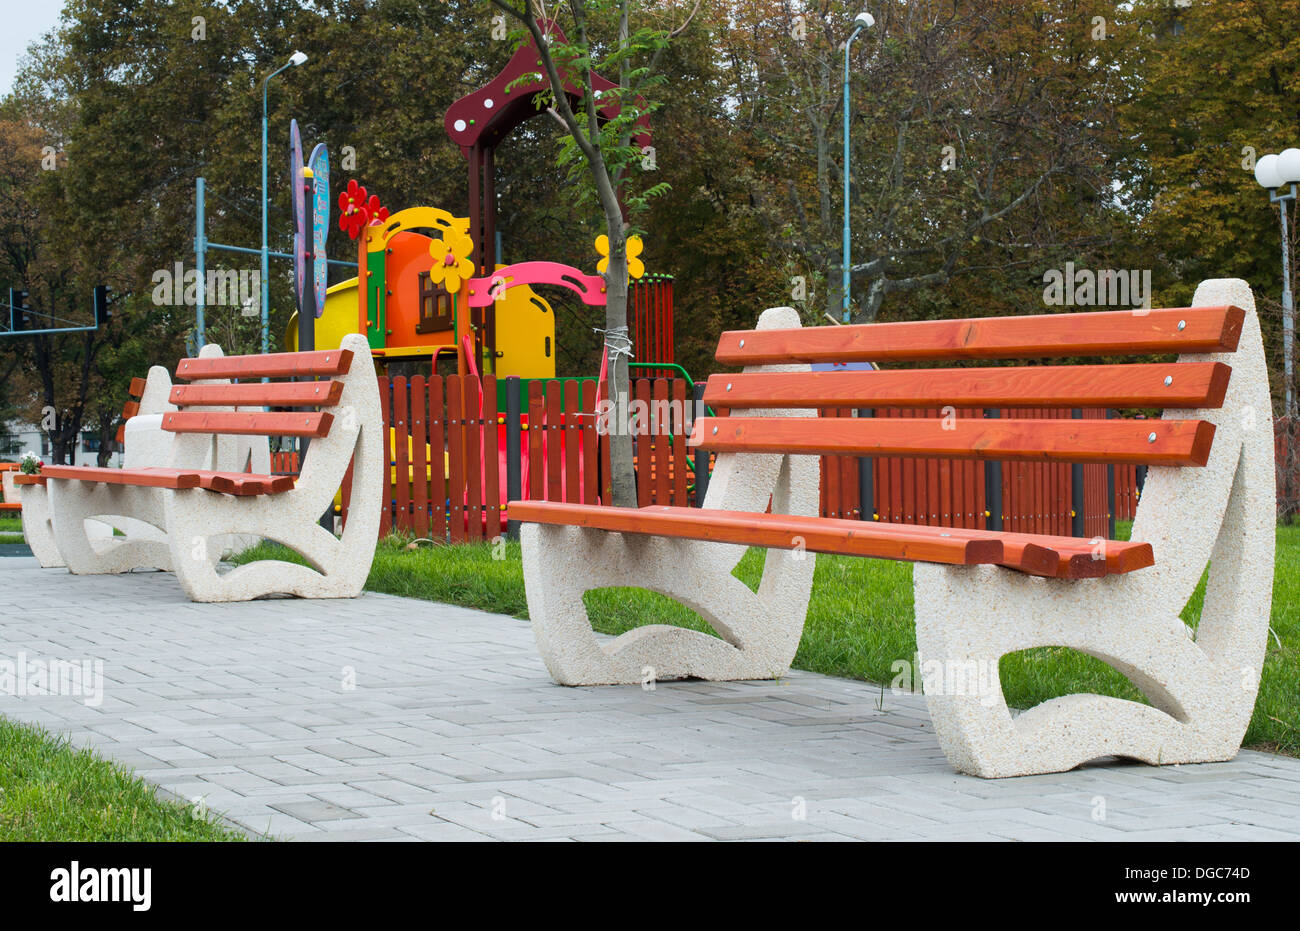 New wooden benches in a park Stock Photo